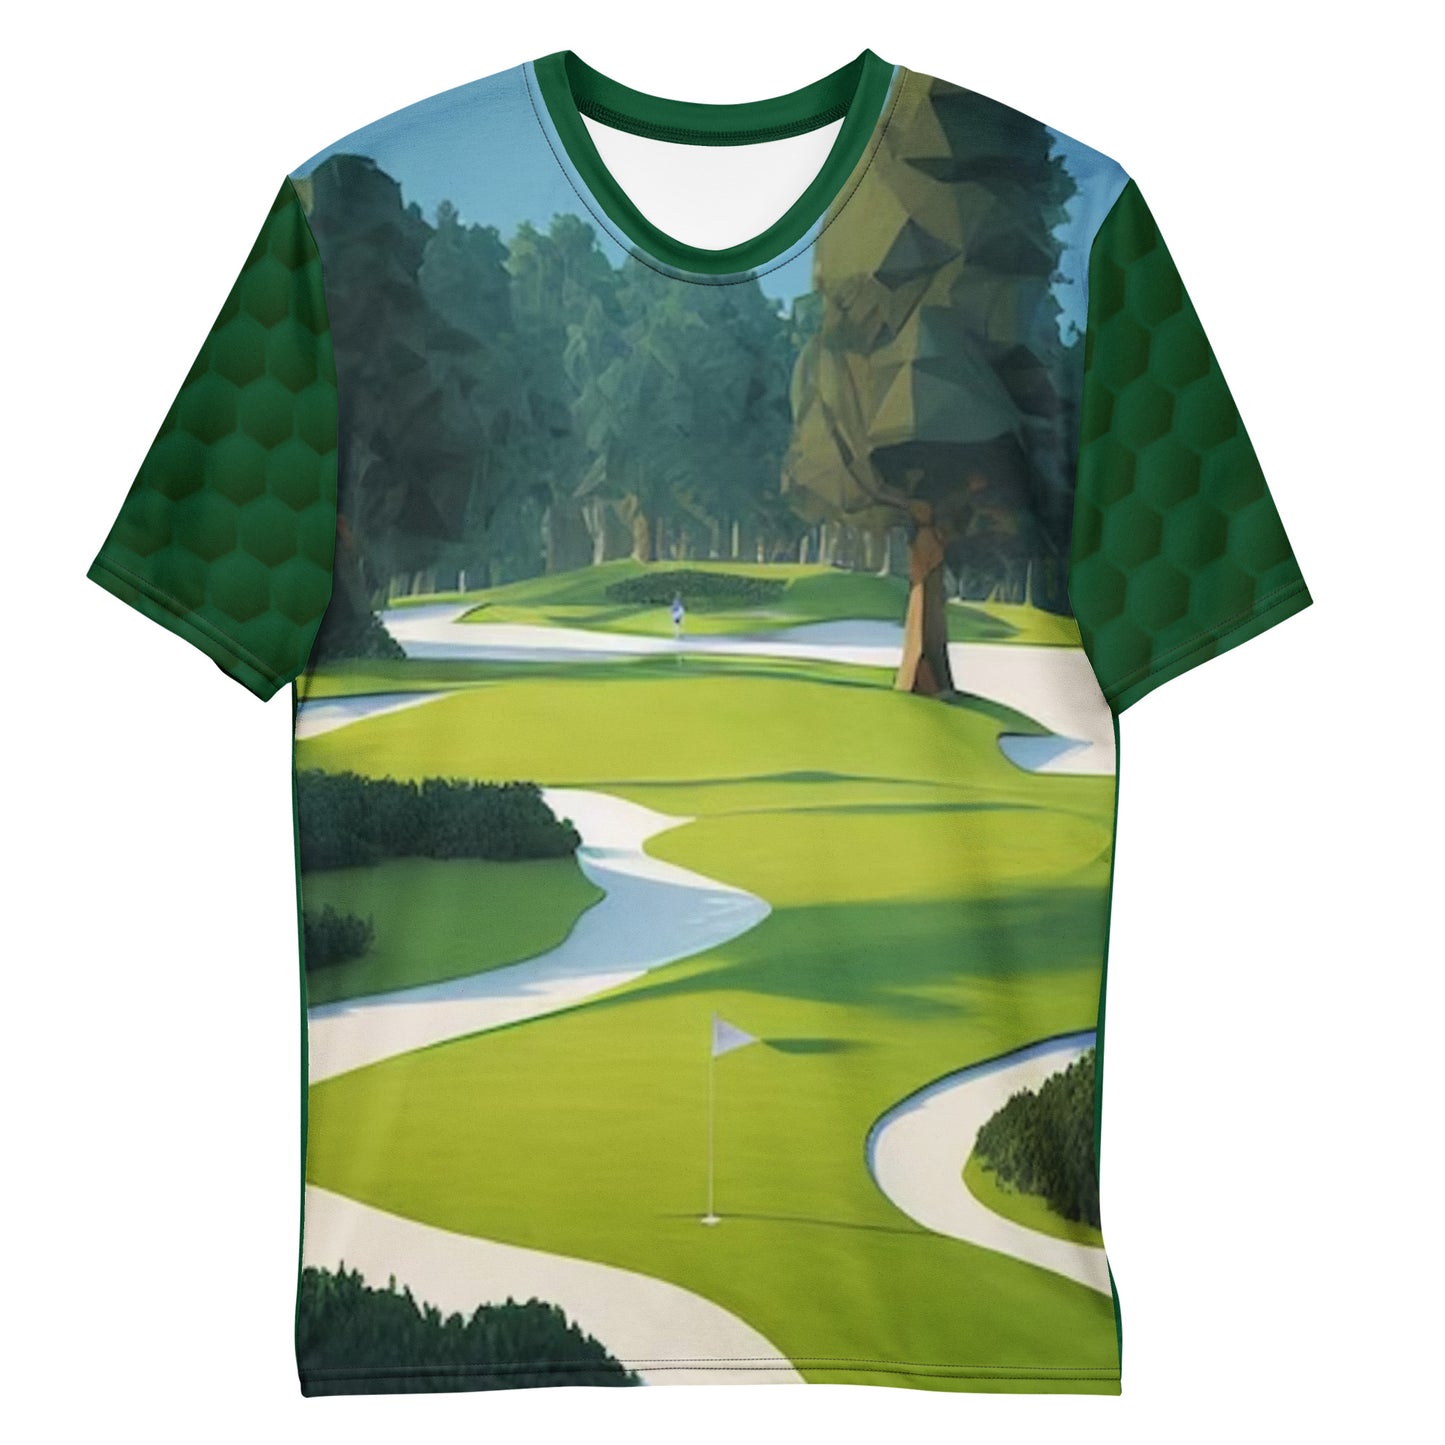 Golf Course TShirt is a Creative Golf Graphic design for Men